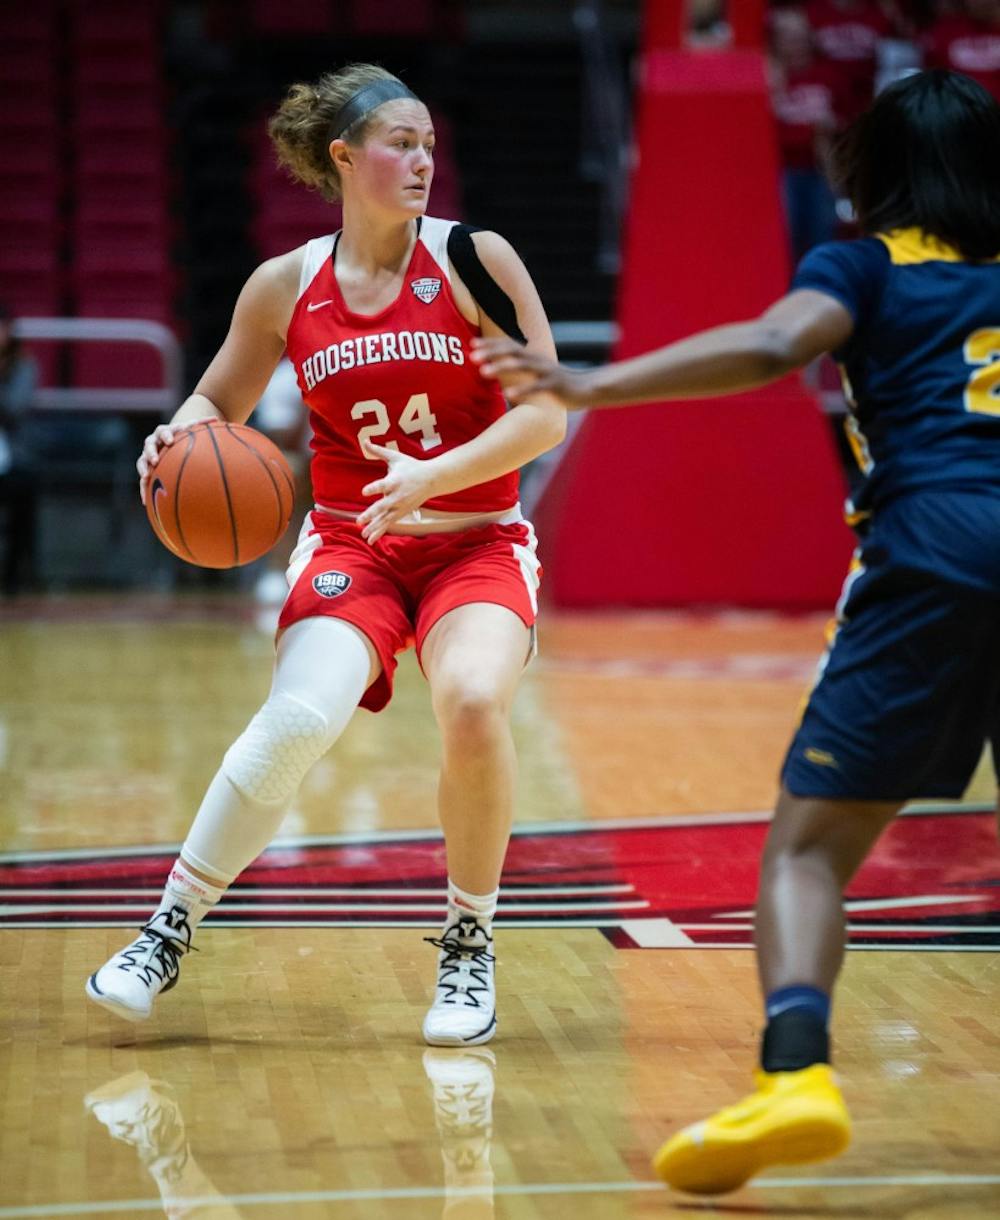 <p>Senior Jasmin Samz moves forward with the ball Feb. 23, 2019 in John E. Worthen Arena during the game against Toledo. The Rockets beat out the Hoosieroons 63-62. <strong>Scott Fleener, DN</strong></p>